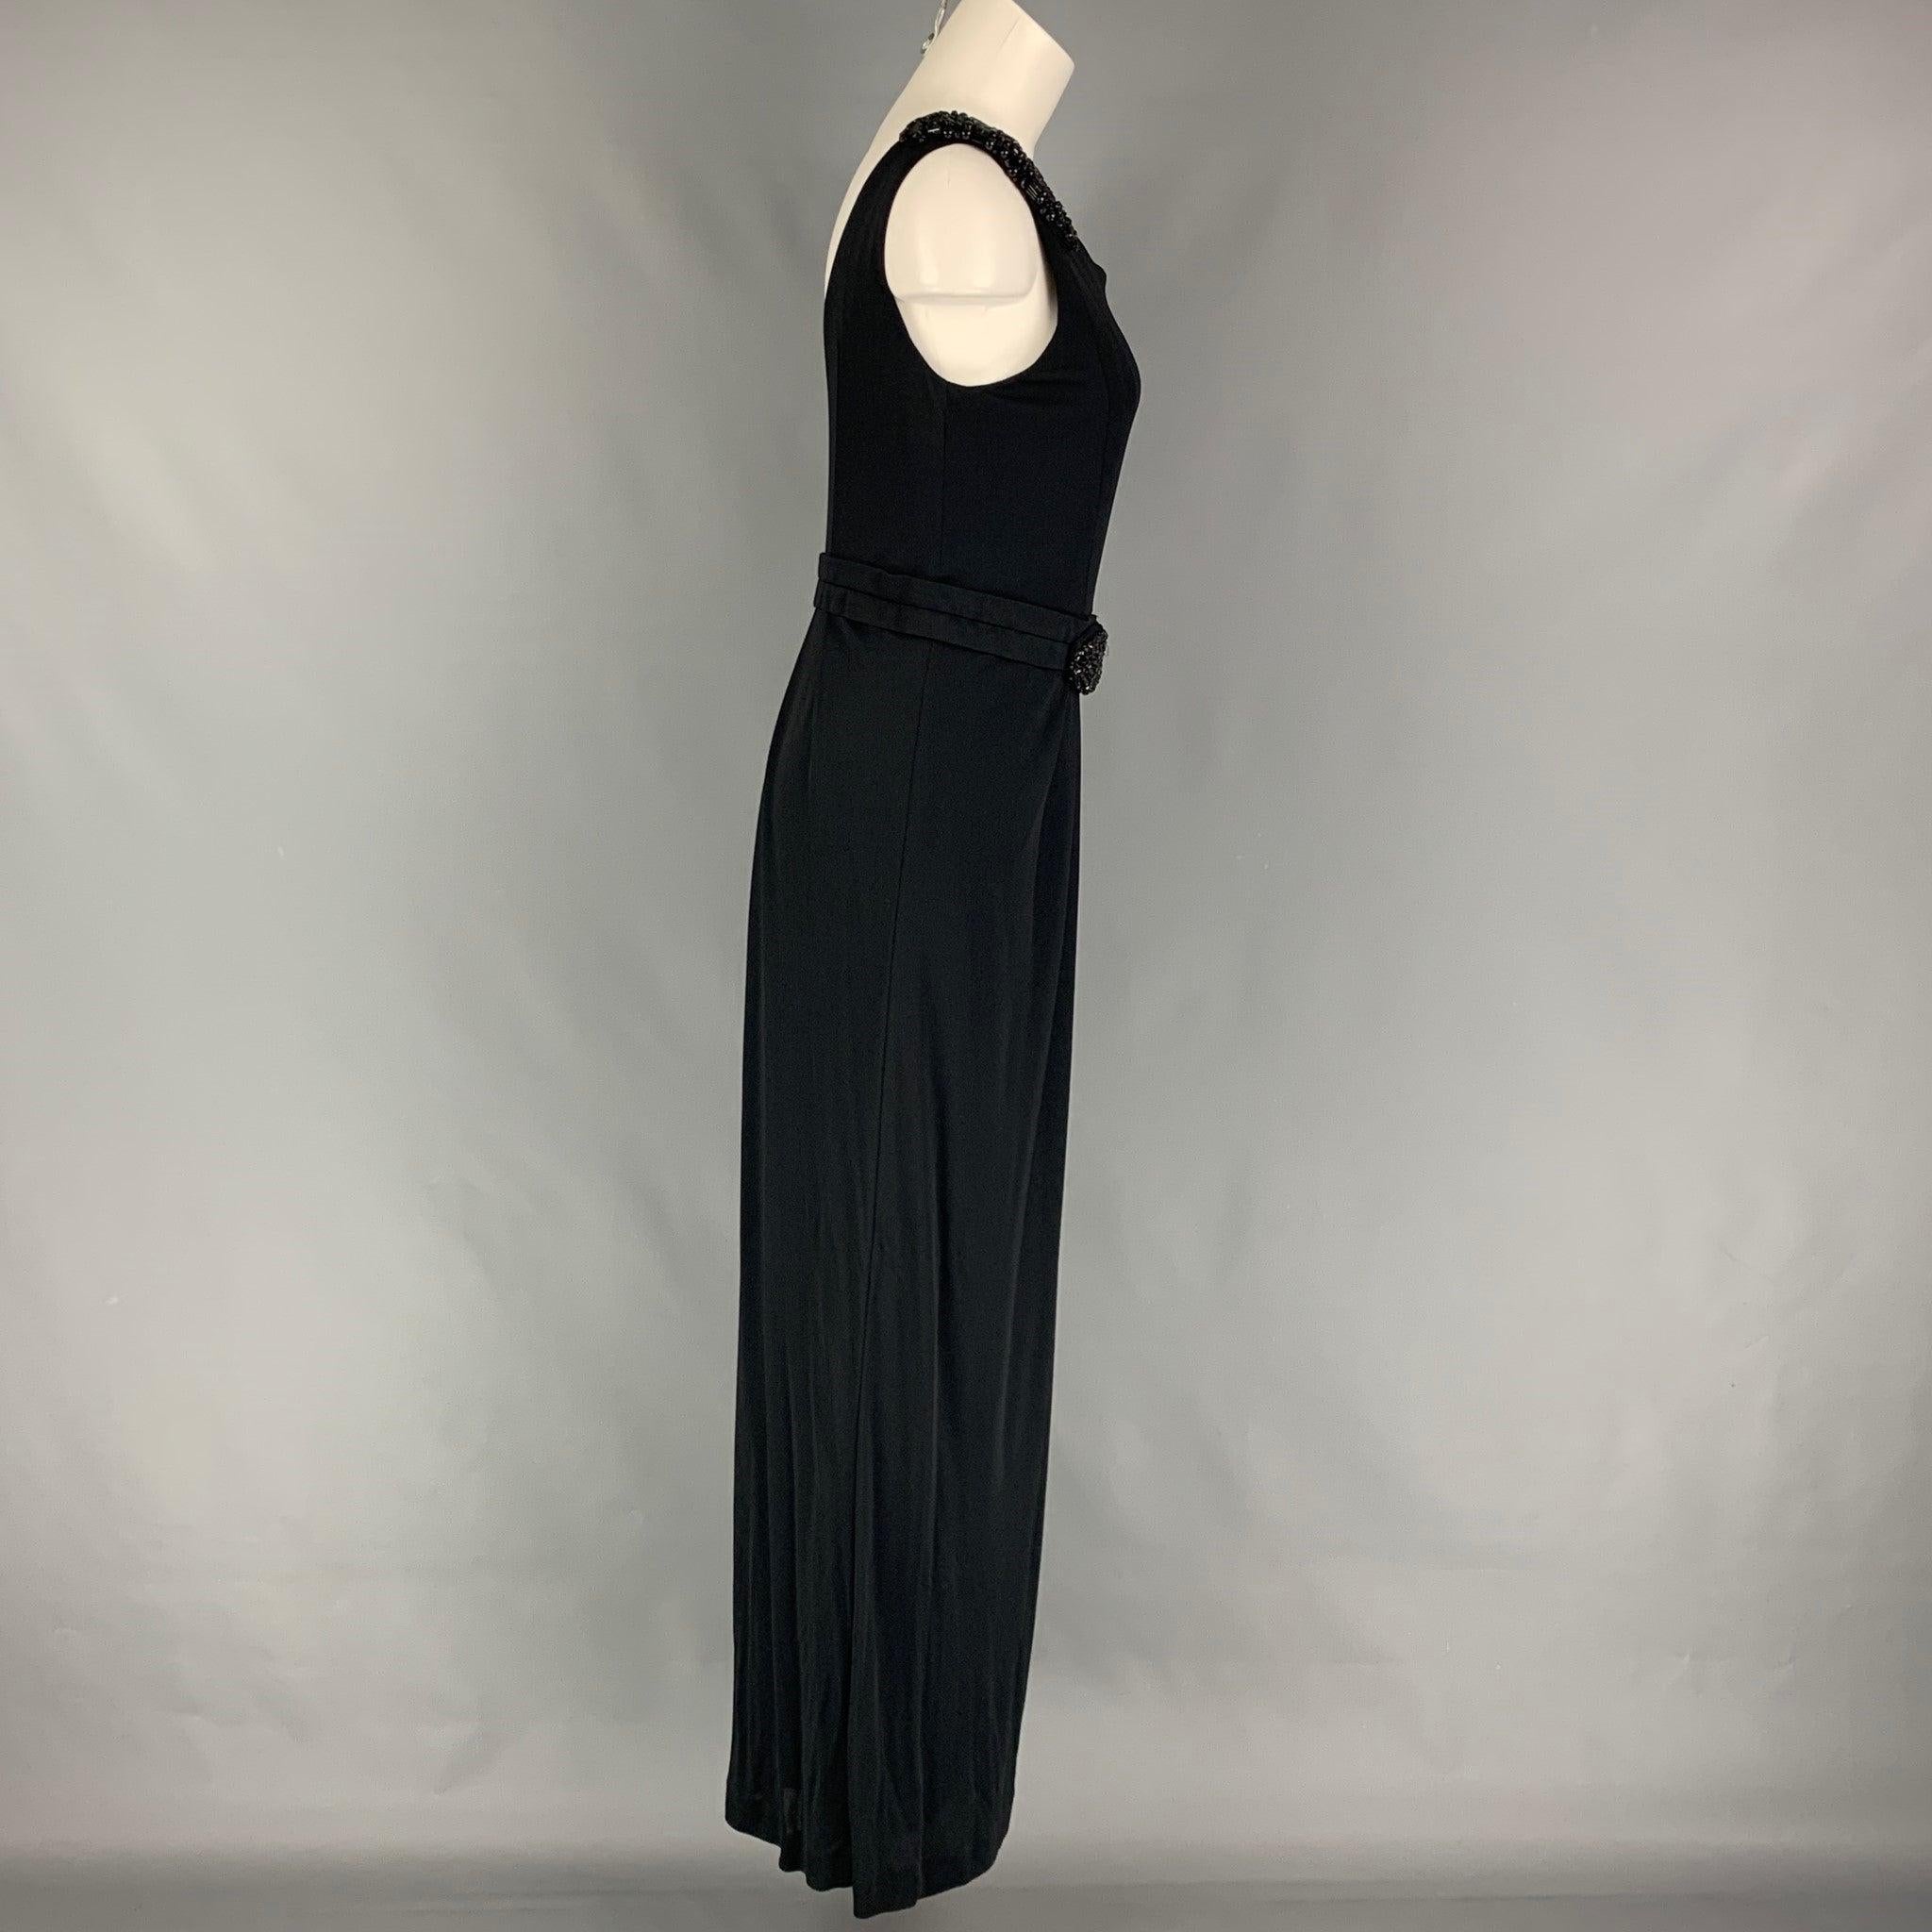 LA PERLA long dress comes in a black viscose /nylon featuring a sleeveless style, beaded embellishments, and a side zipper closure.
Very Good
Pre-Owned Condition. 

Marked:   44 

Measurements: 
  Bust: 30 inches  Waist: 28 inches  Hip: 32 inches 